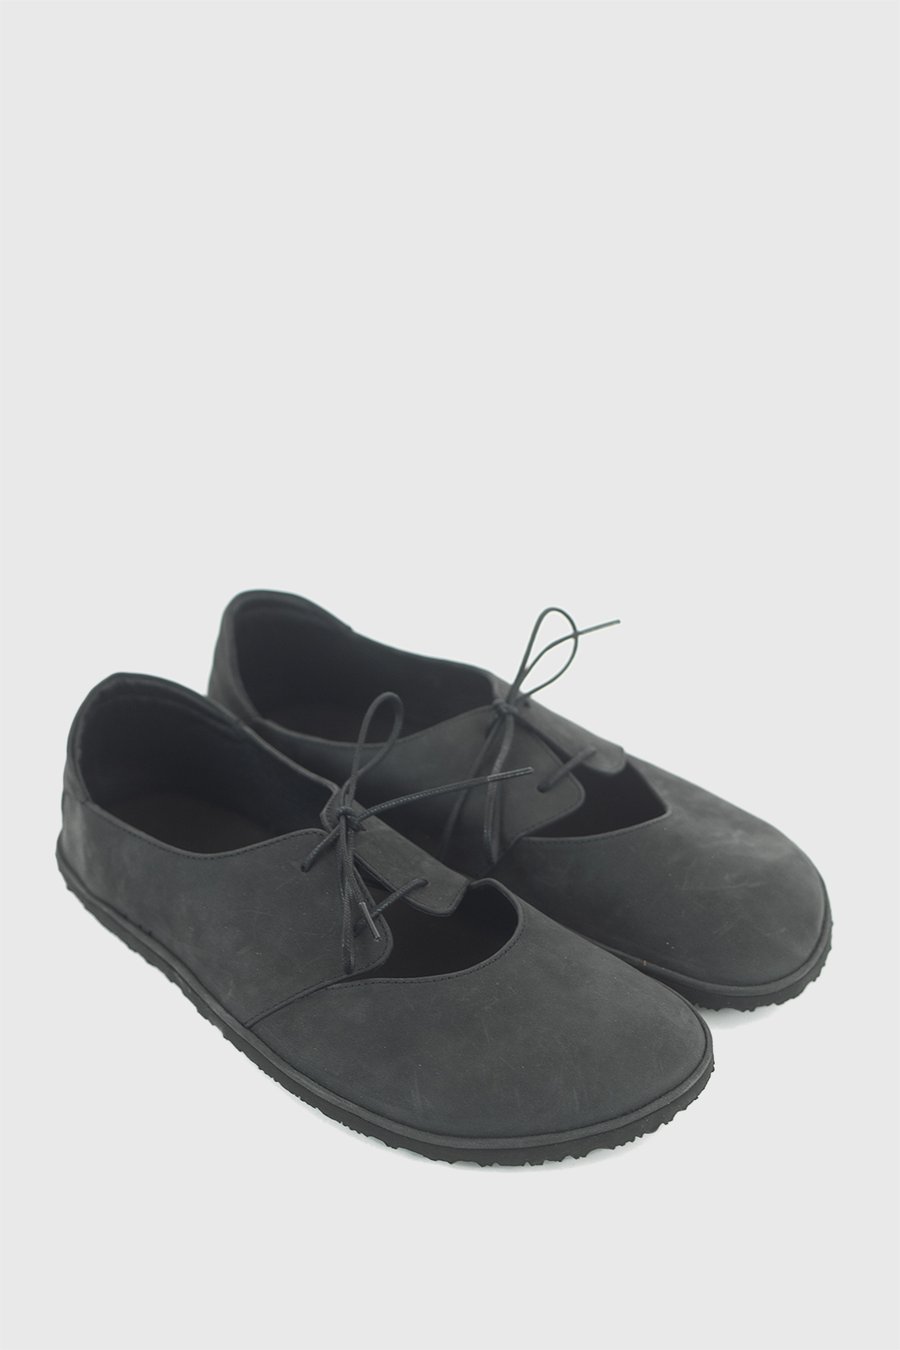 Image of Derby ballet flats in Black Nubuck - 43 EU - Ready to ship